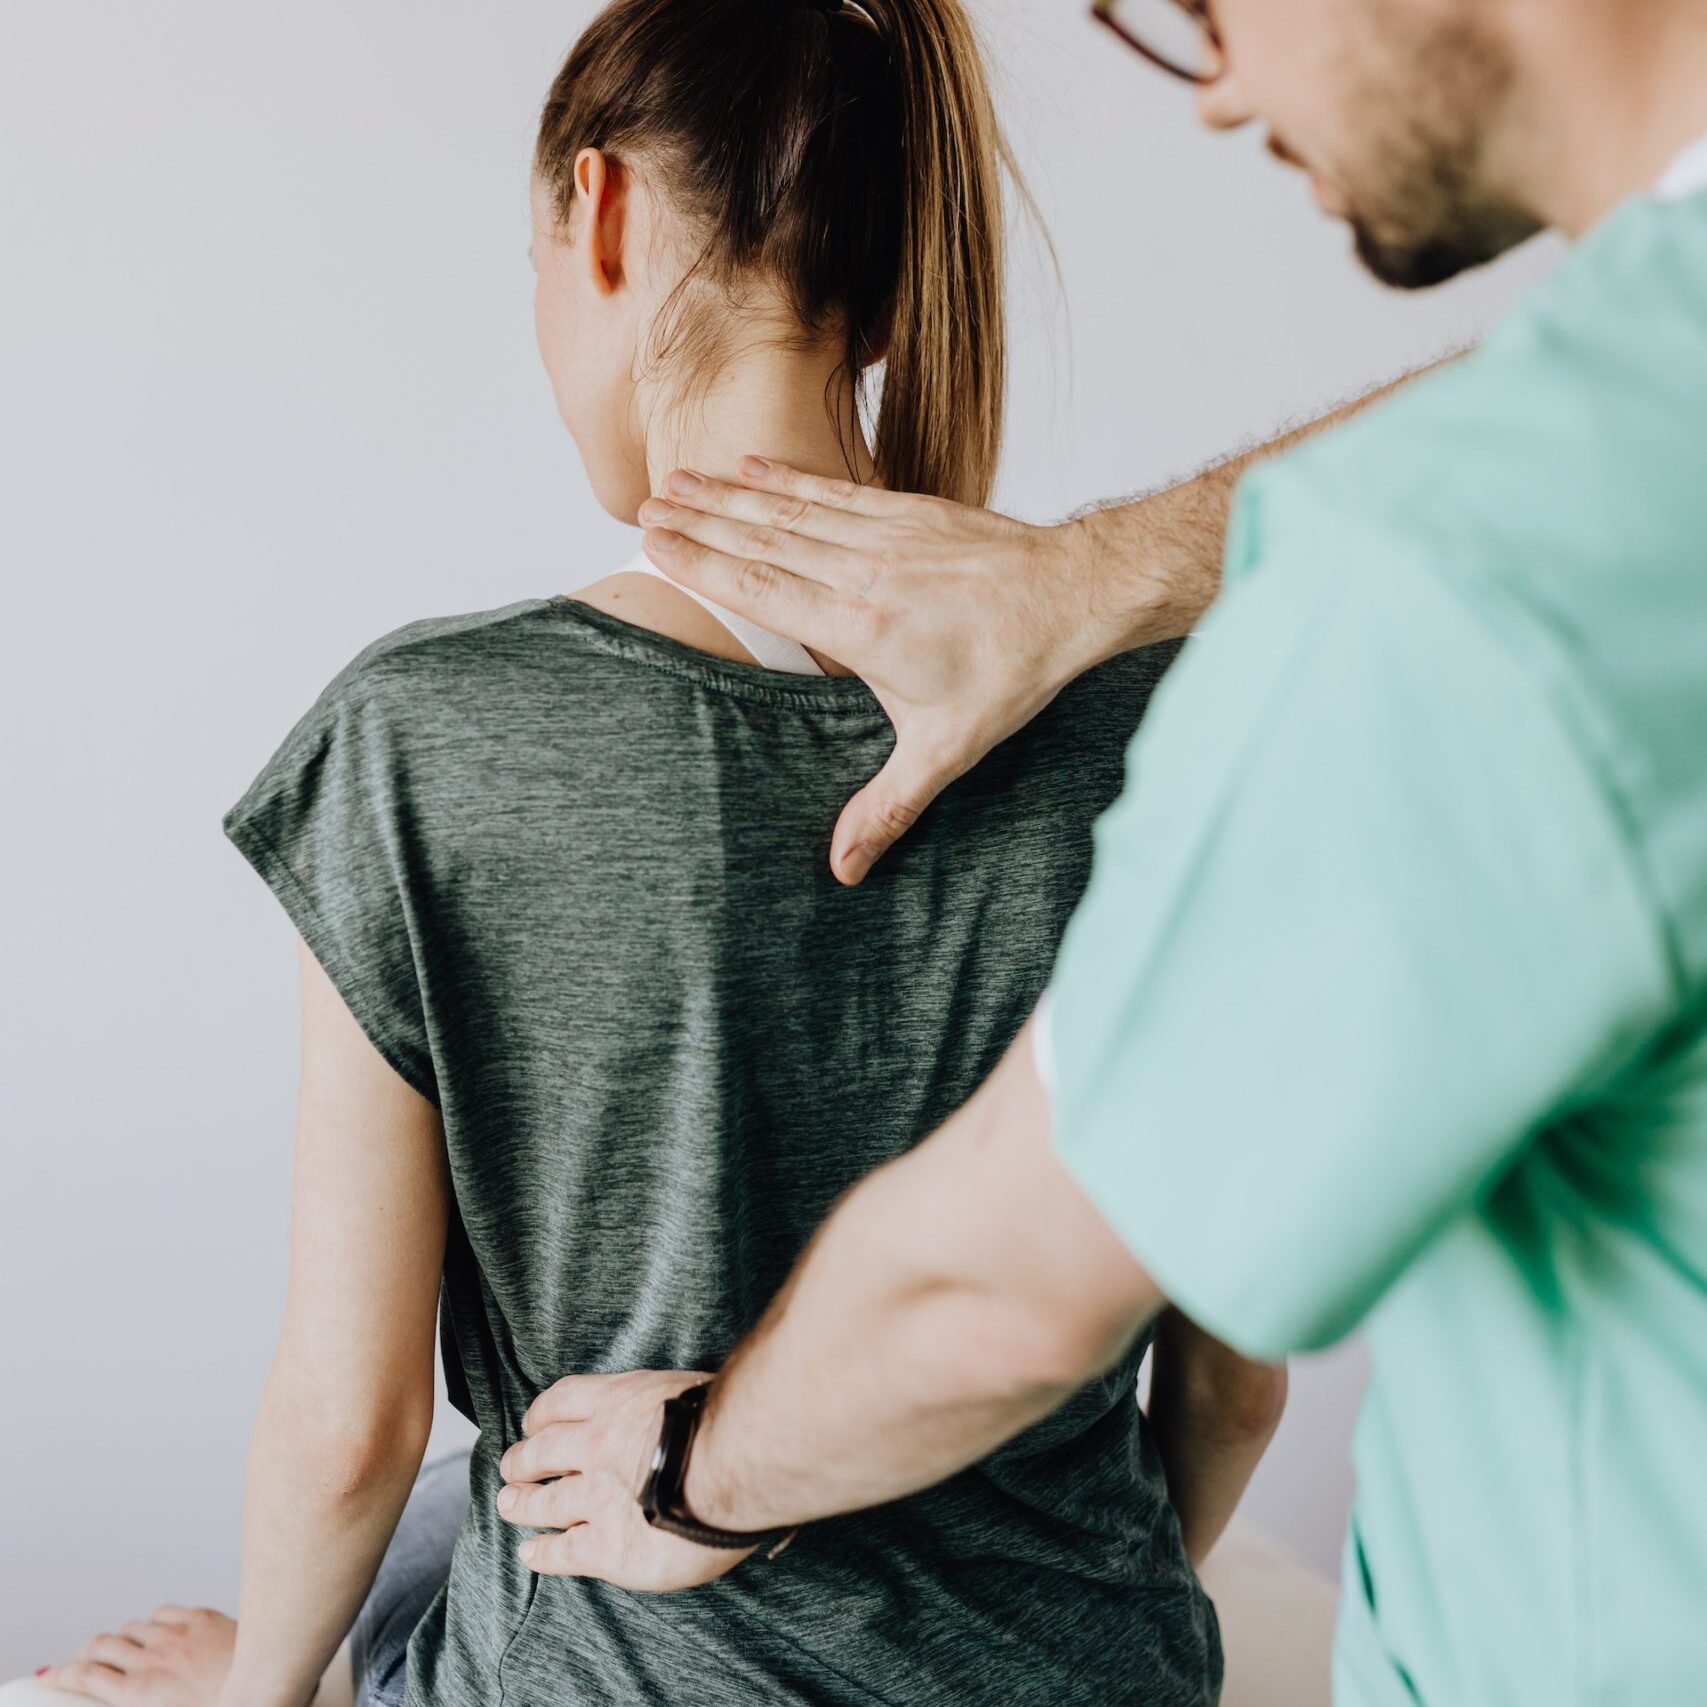 back pain in south Milwaukee, south milwaukee back pain, back pain south milwaukee